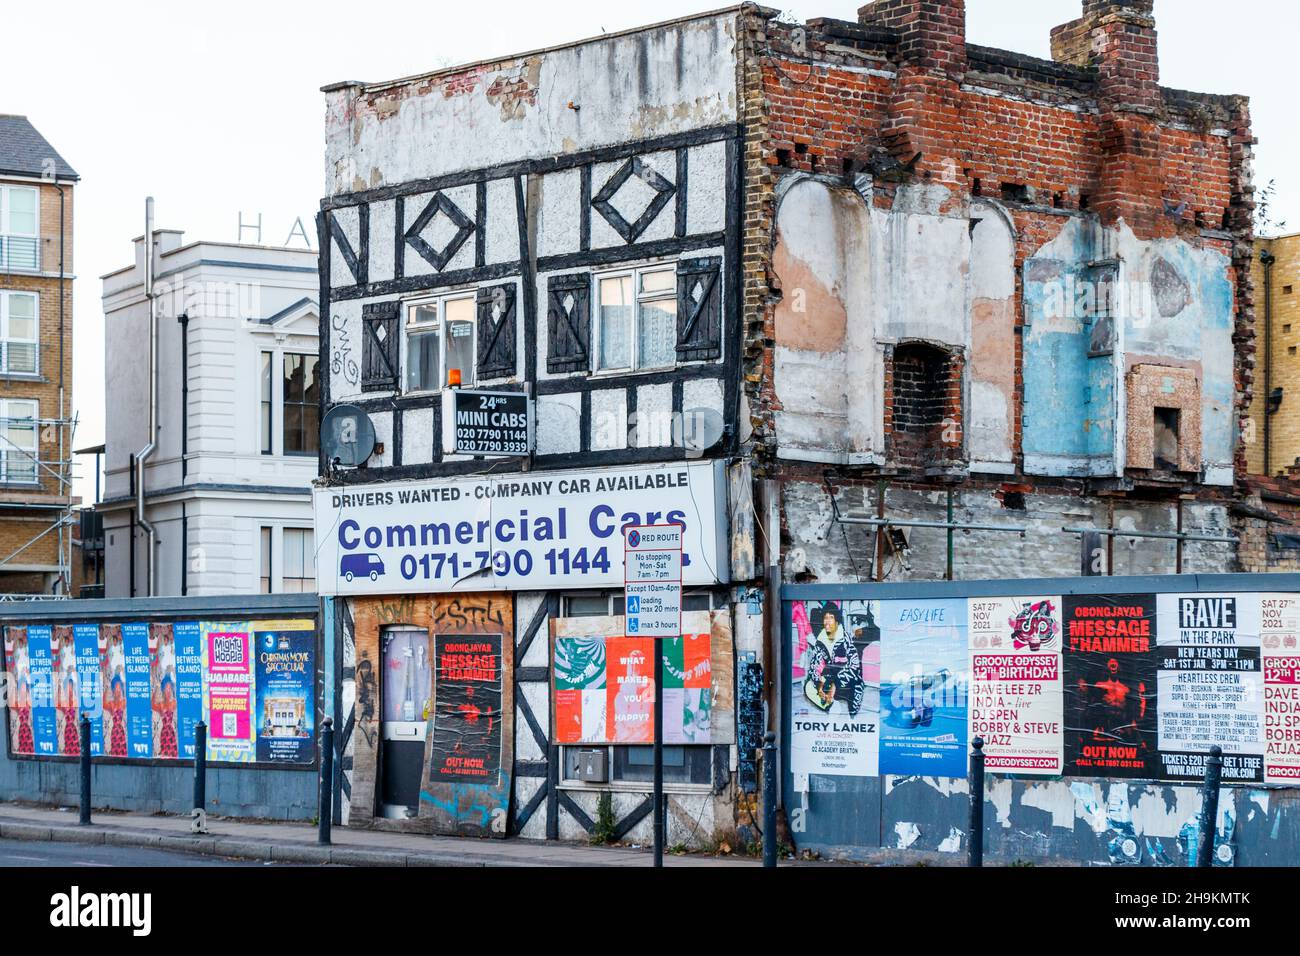 A minicab firm in the last-standing property in a row of demolished buildings in Commercial Road, LImehouse, London, UK Stock Photo